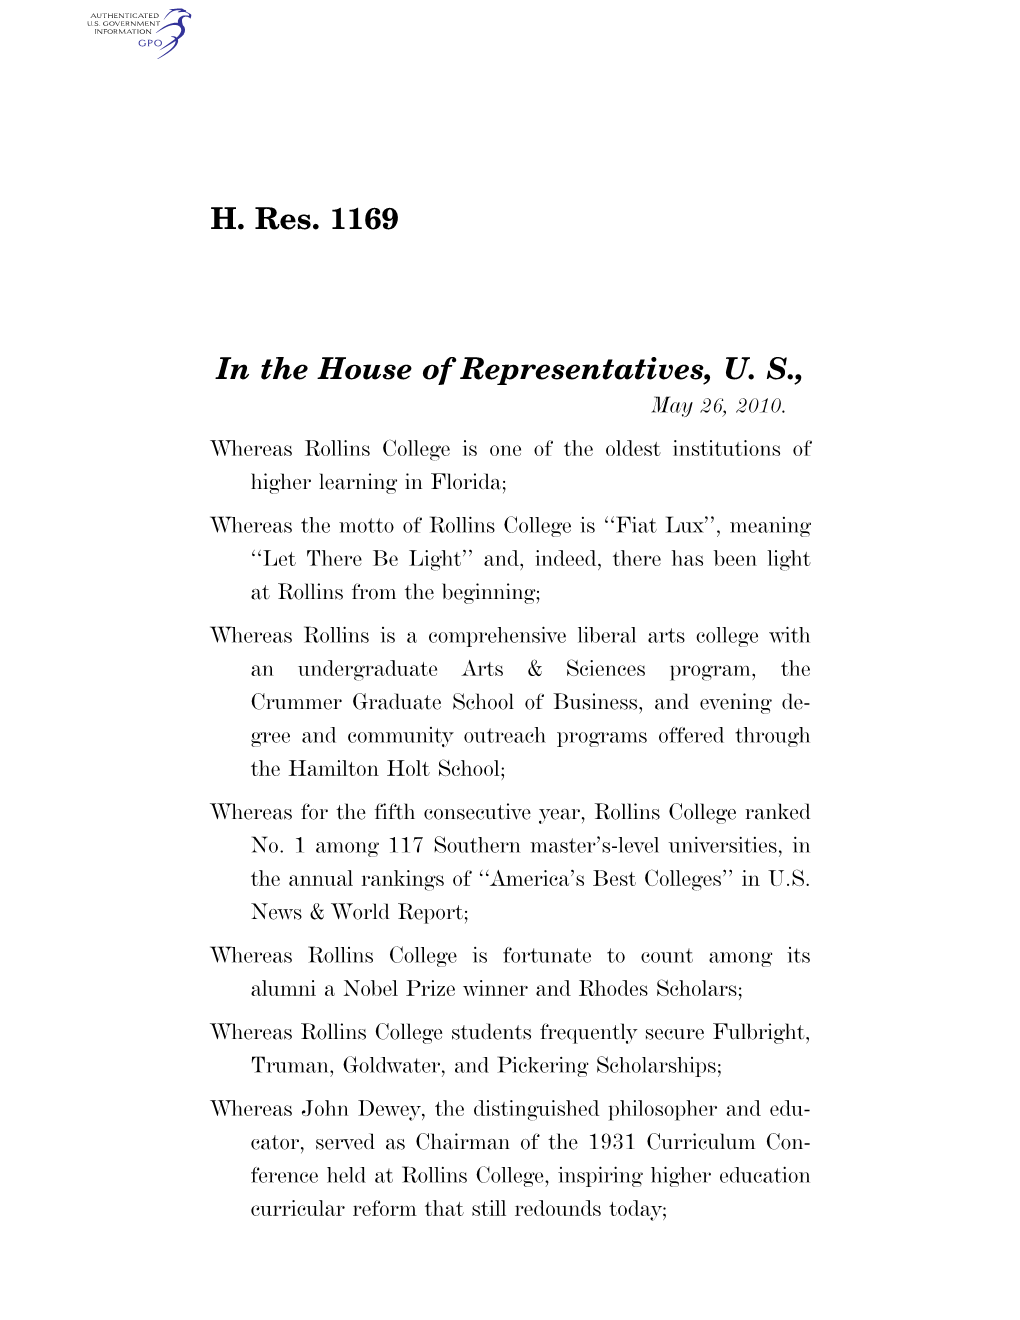 H. Res. 1169 in the House of Representatives, U